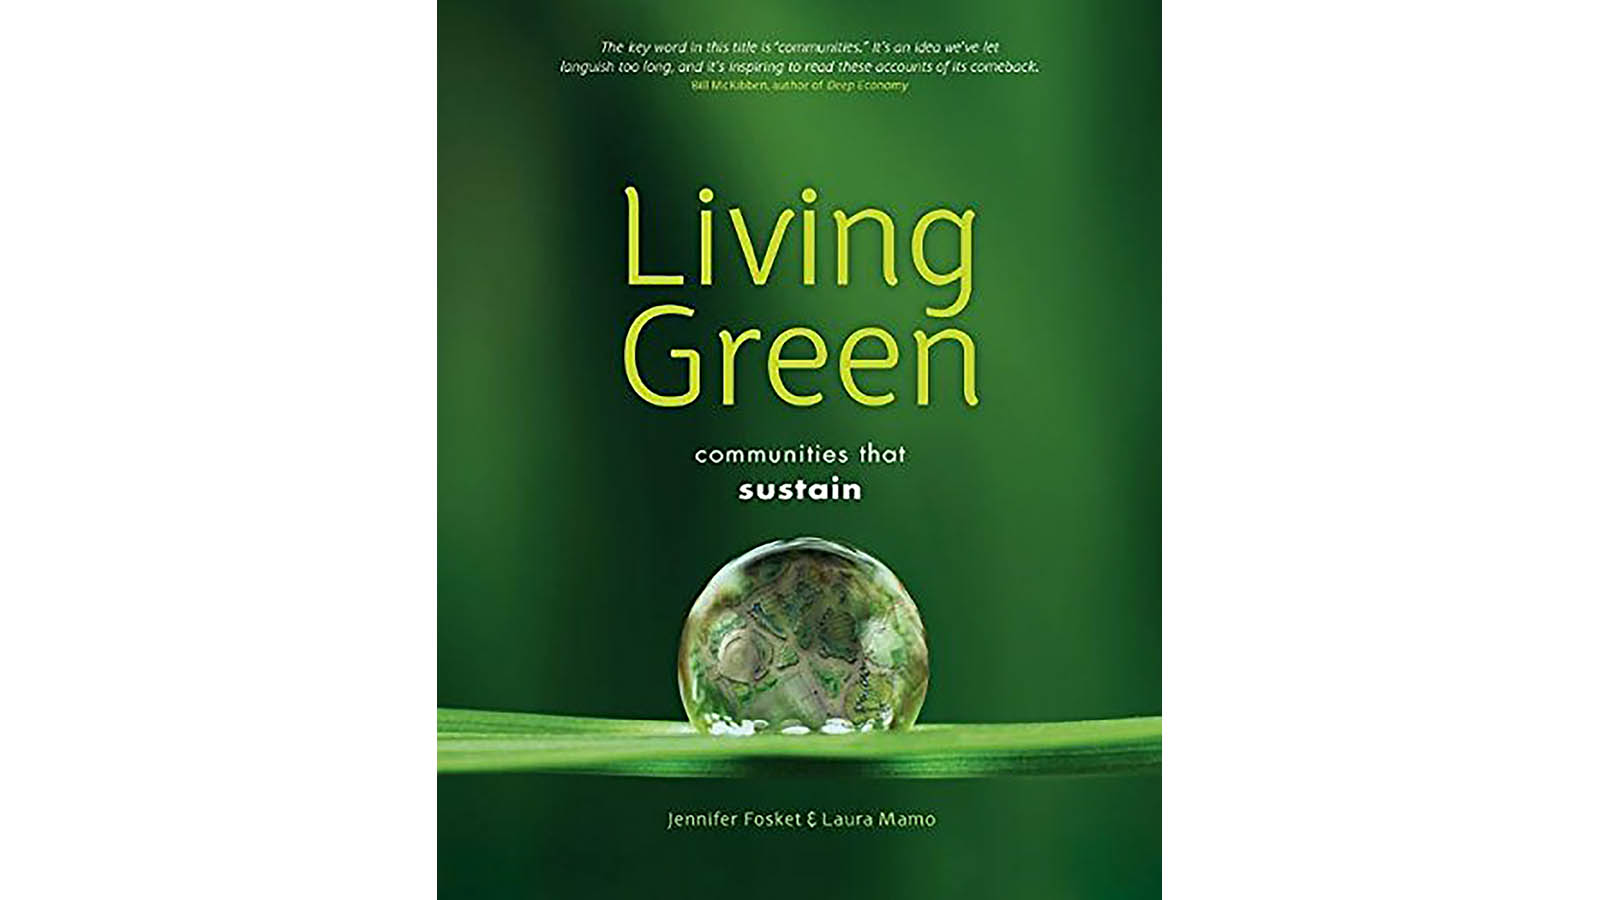 Laura Mamo's book Living Green. A green cover with a close-up of a water droplet atop a leaf.